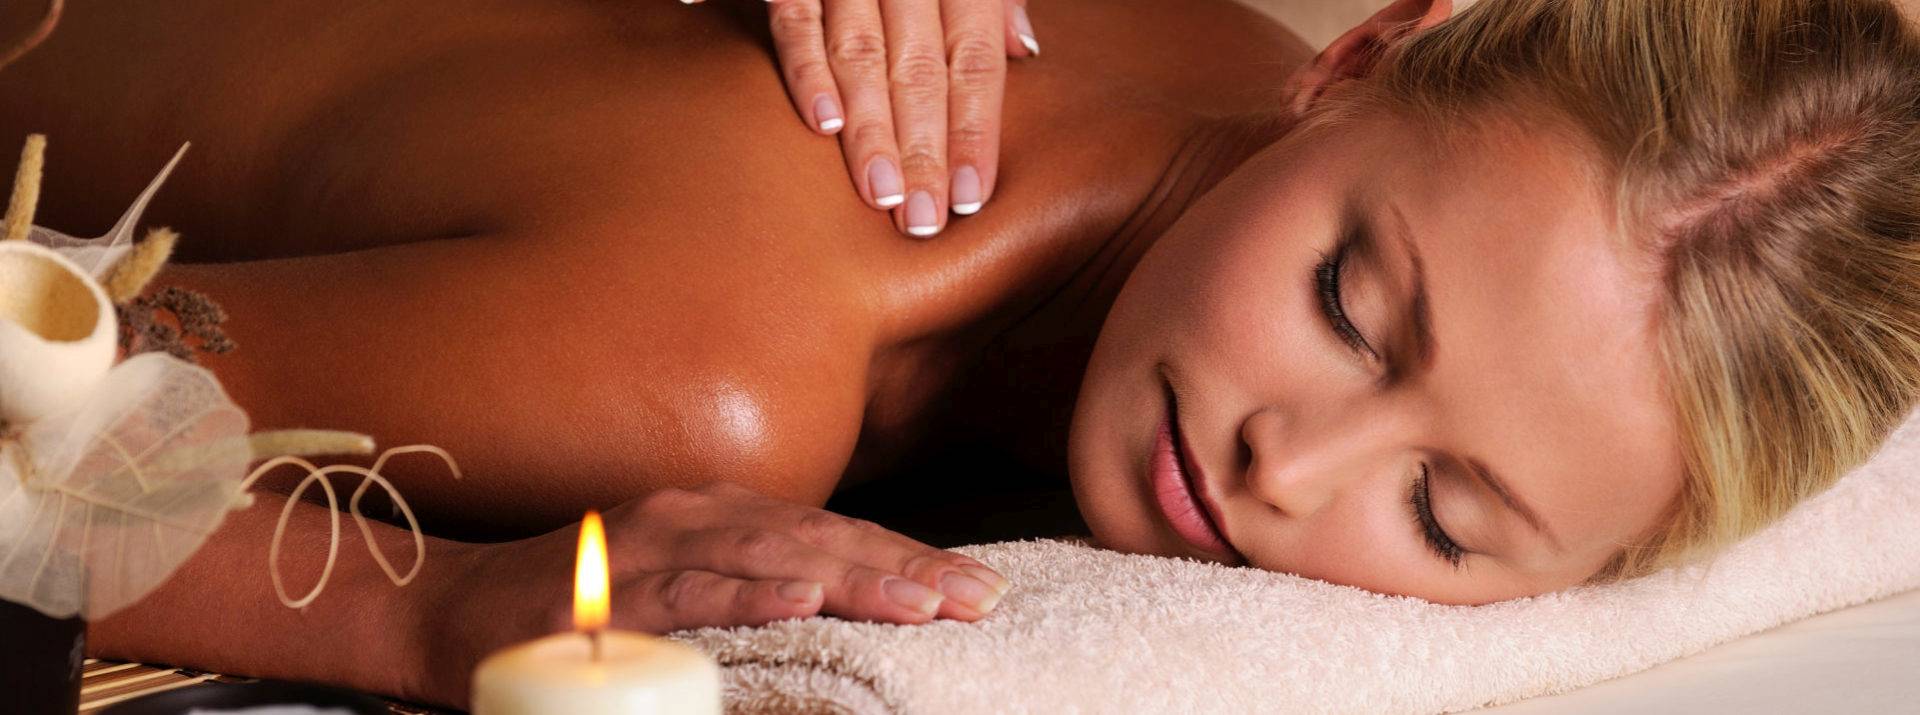 massage therapy relaxation